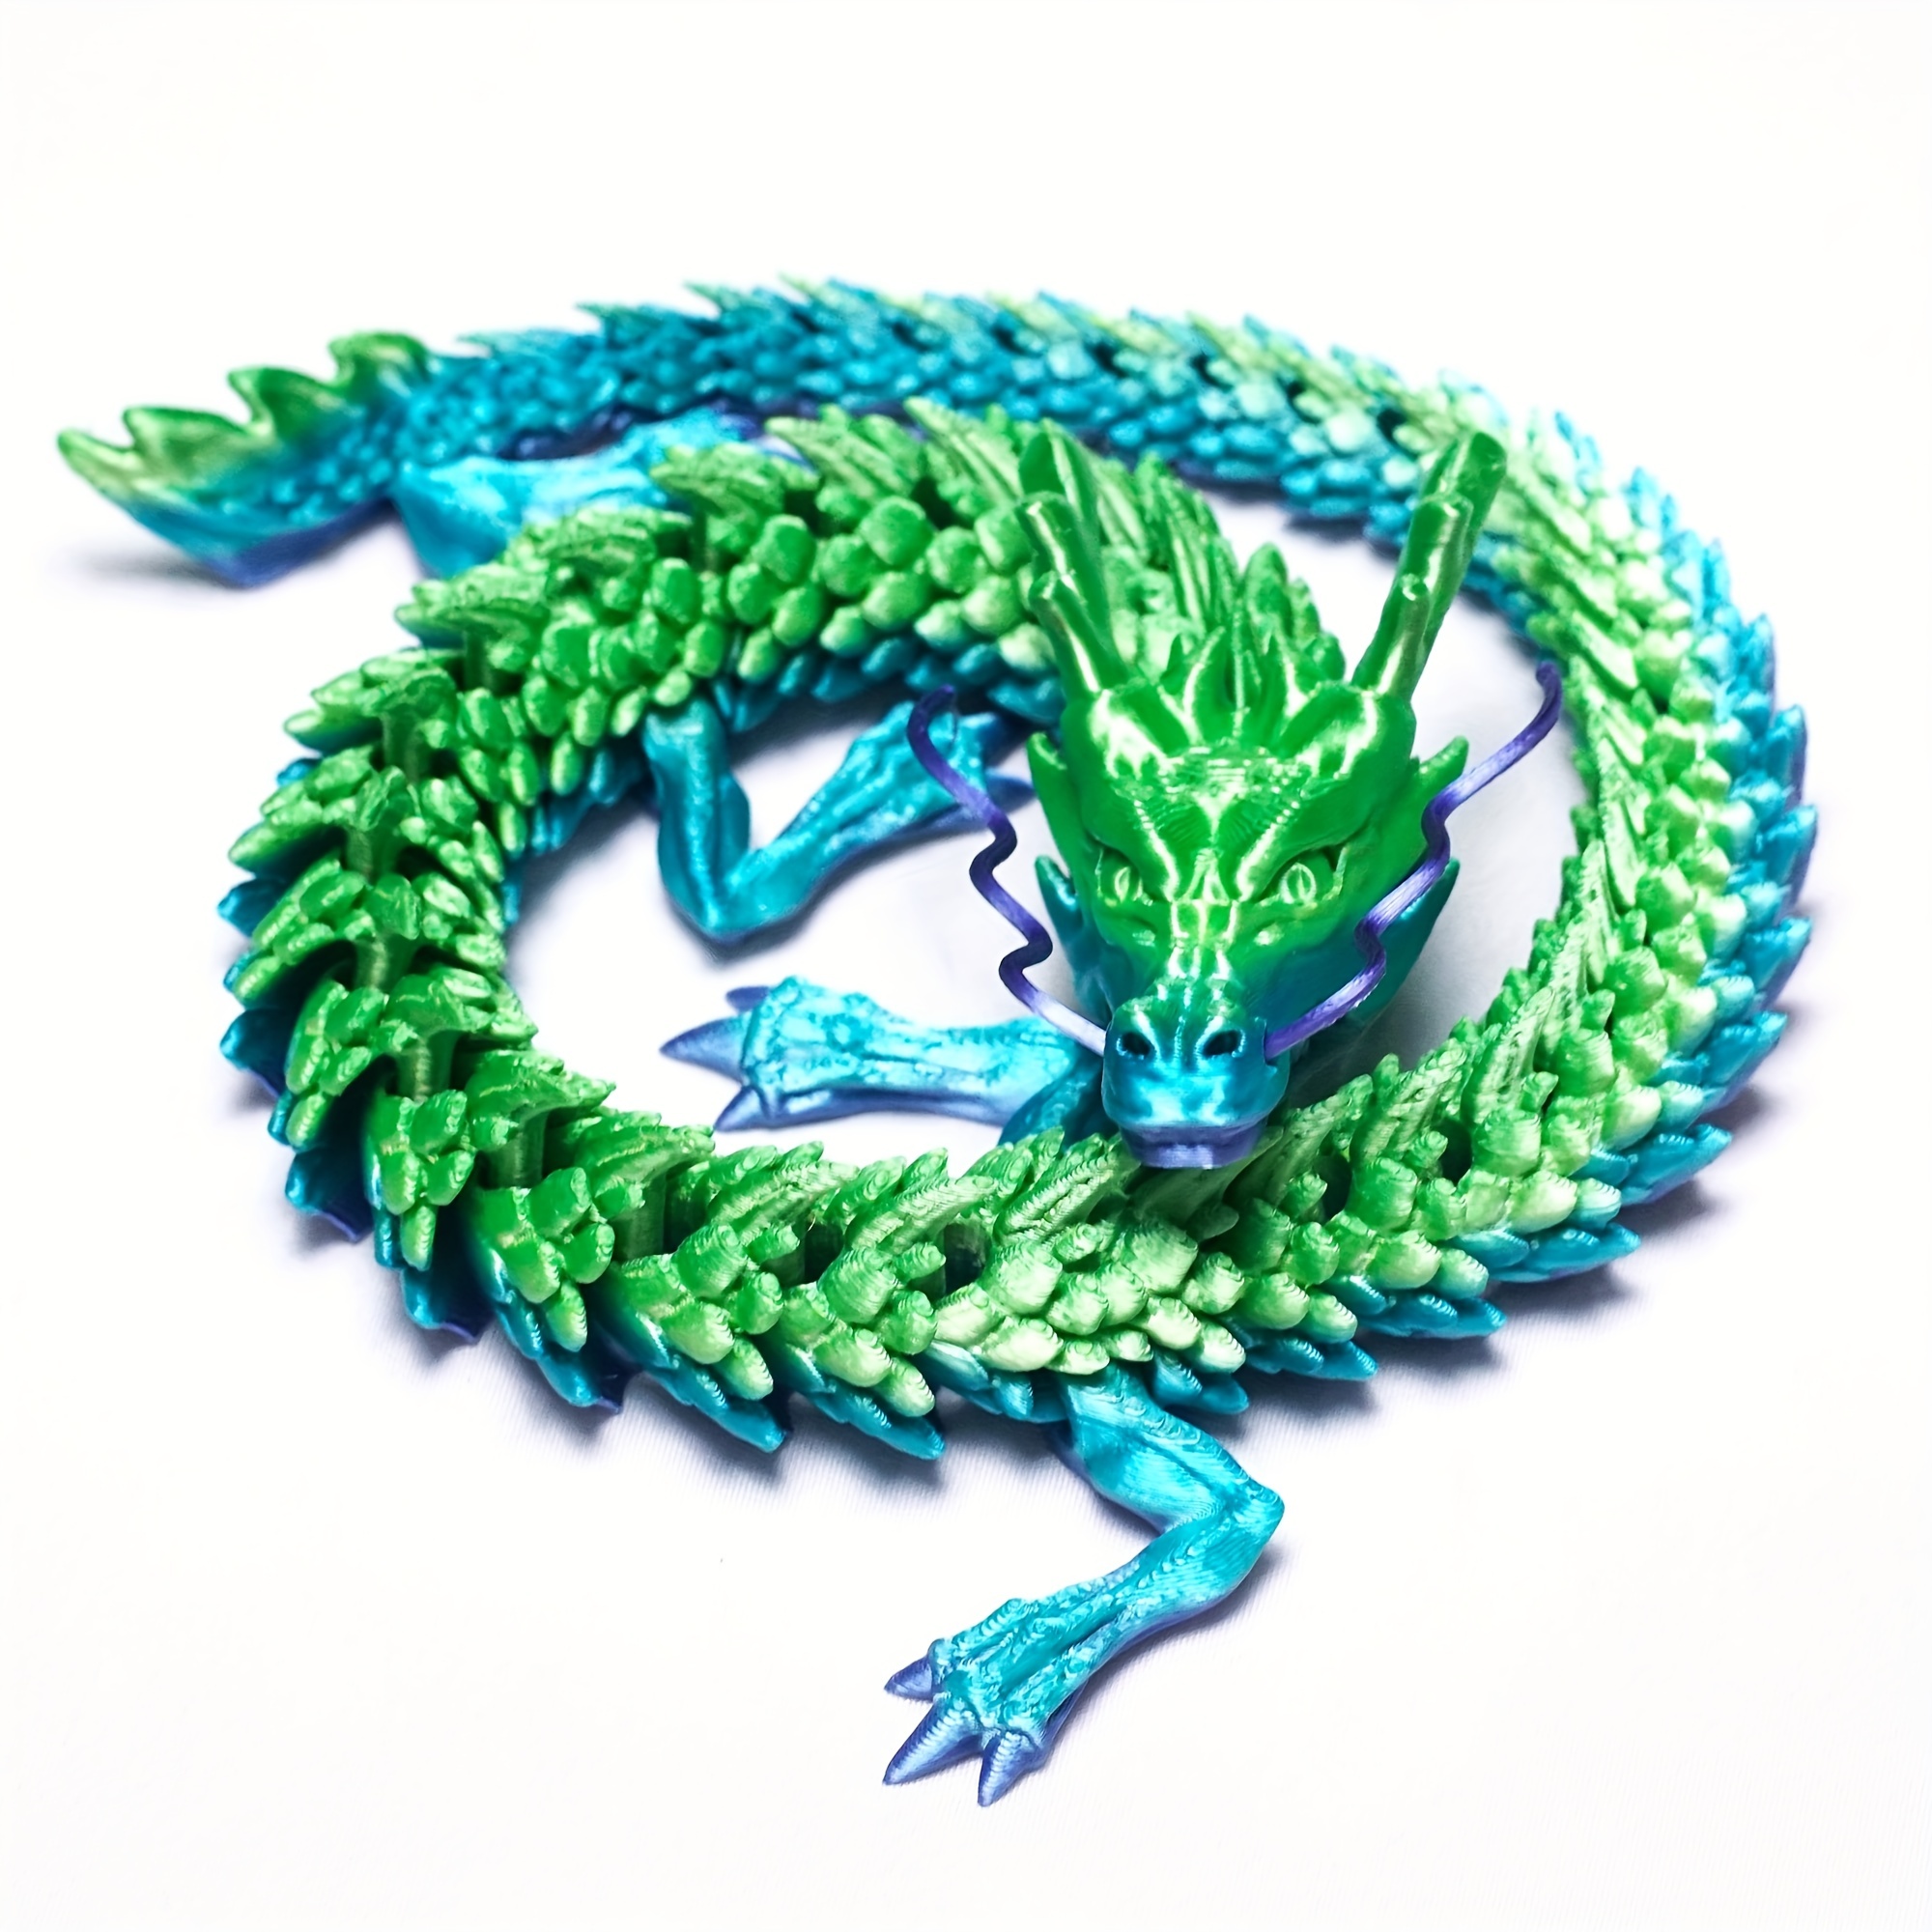 Dragon Dragon Toy Figurine With Movable Joints 3d Printed